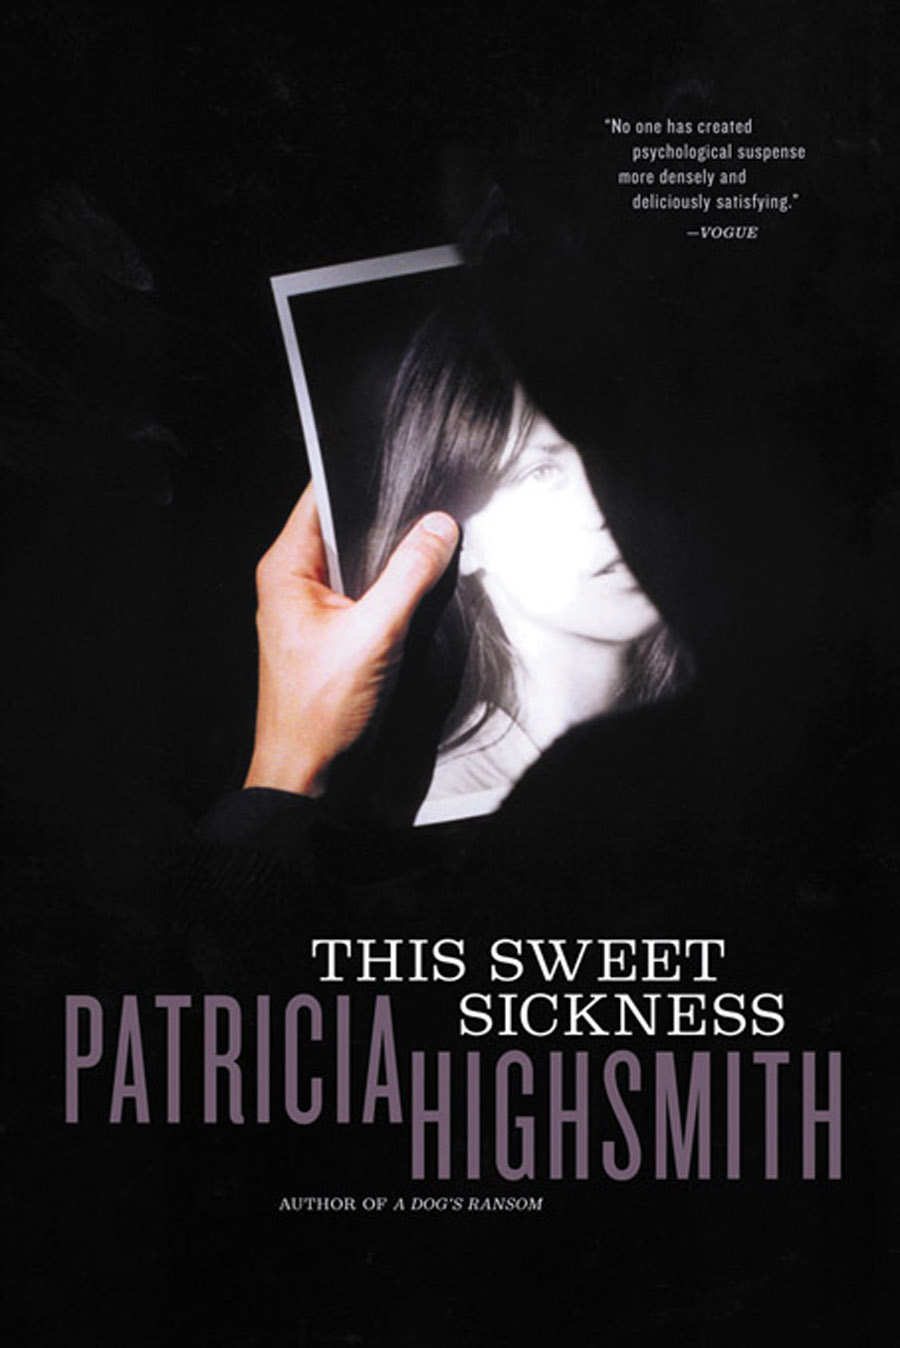 This Sweet Sickness (2012) by Patricia Highsmith